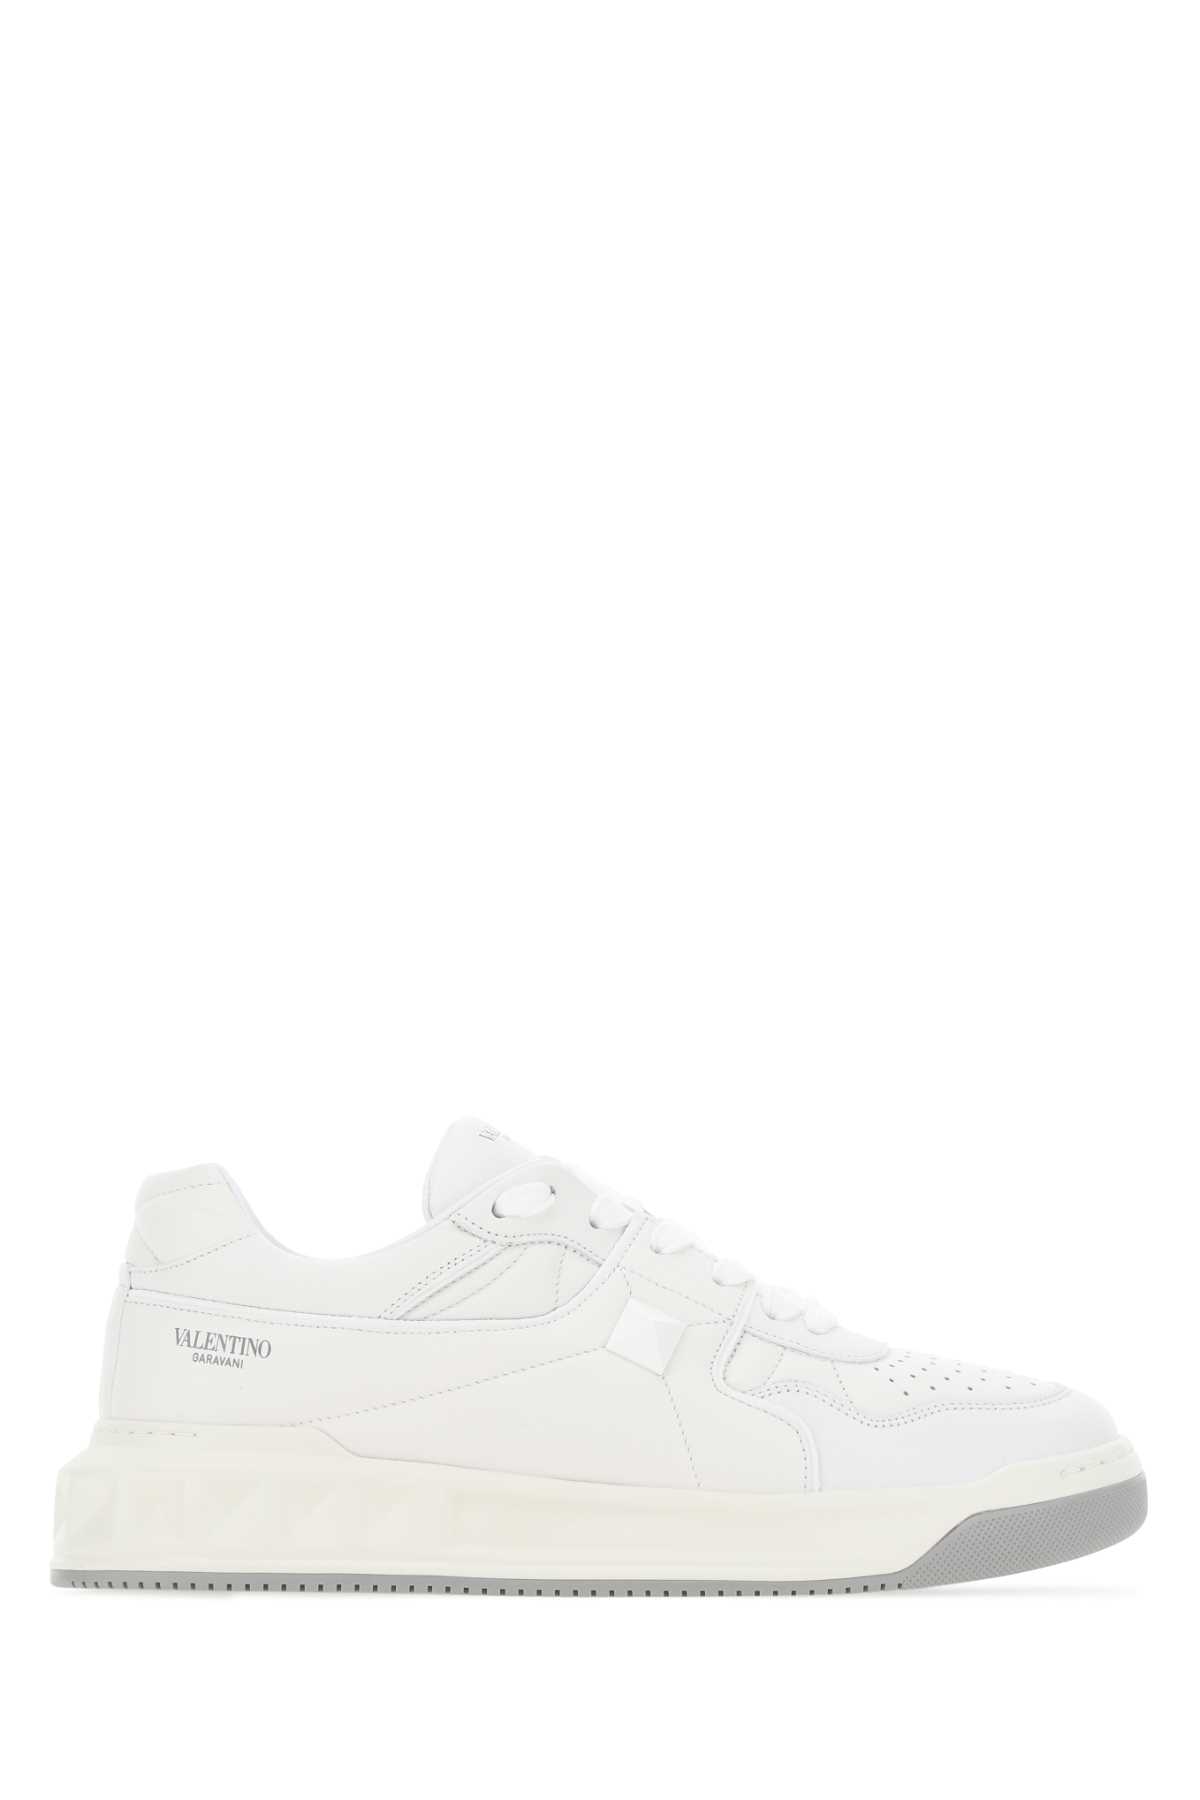 Shop Valentino White Nappa Leather One Stud Sneakers